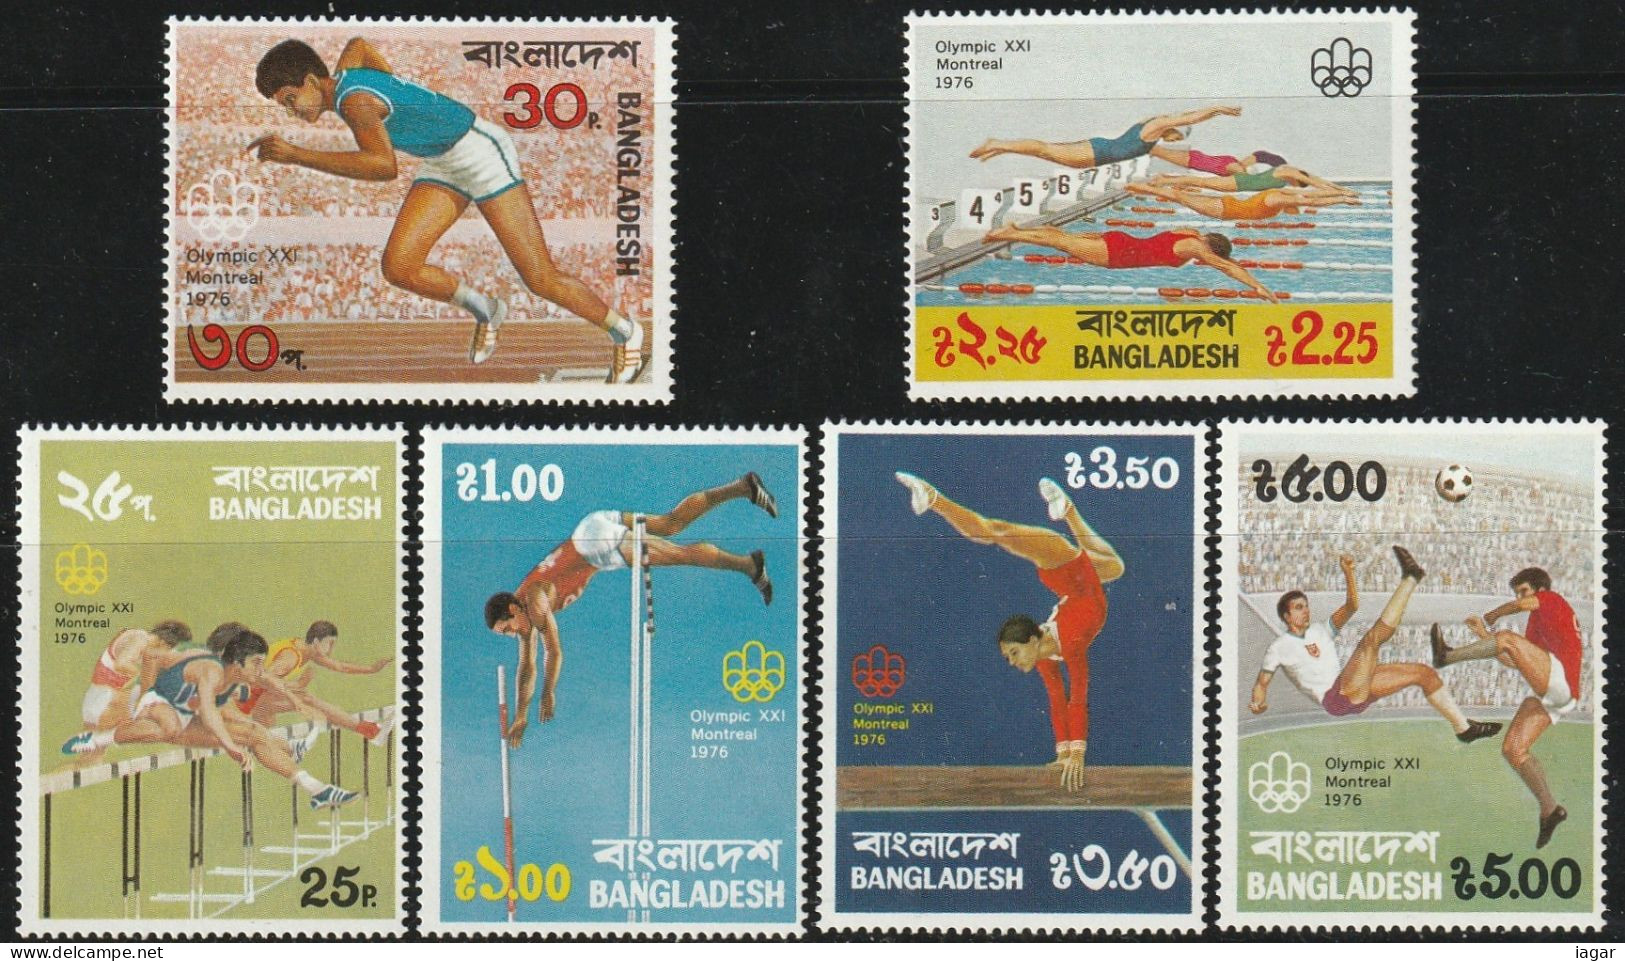 THEMATIC OLYMPIC GAMES: MONTREAL '76. HURDLING,RUNNING,POLE VAULTING,SWIMMING,GYMNASTICS,FOOTBALL   -  BANGLADESH - Ete 1976: Montréal